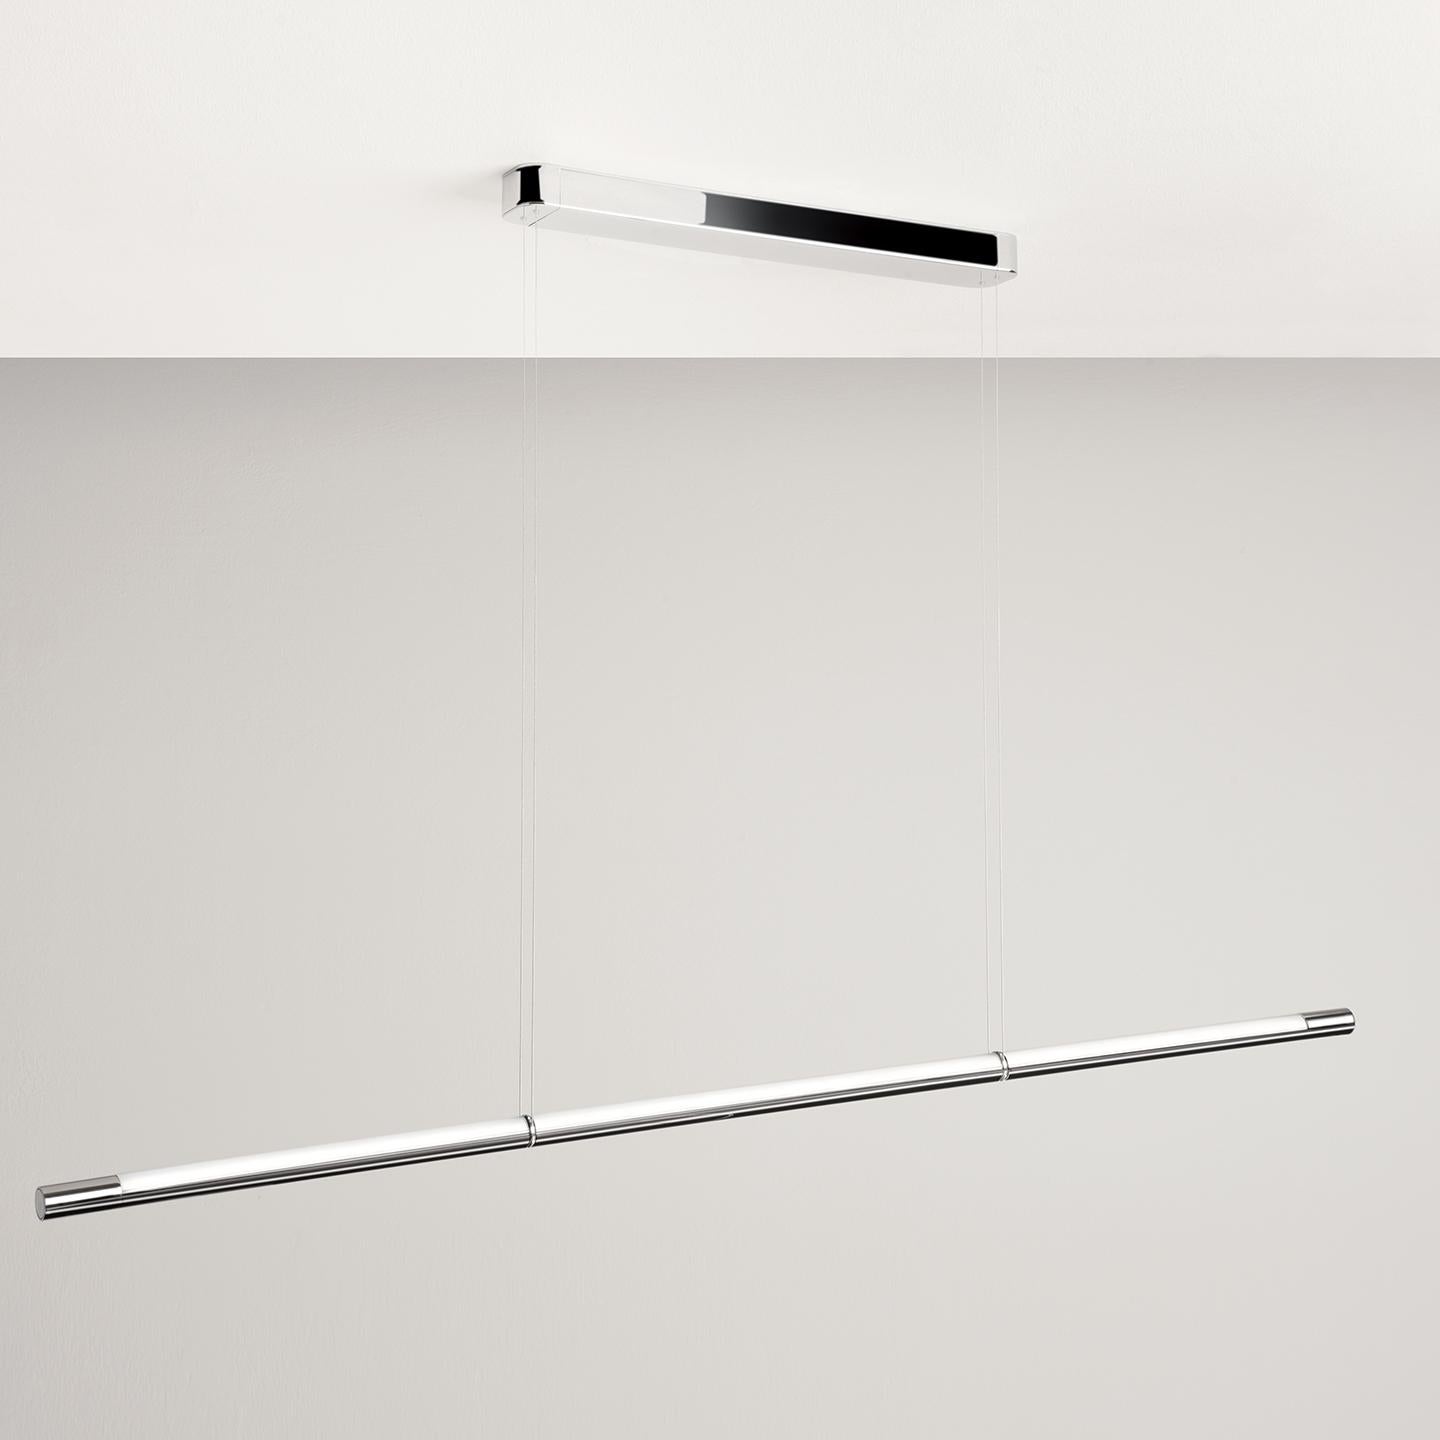 The Volta, by FROM Industrial Design, is an innovative linear suspension lamp that takes state of the art technology and compacts it into a simple form and user experience. The lamp floats on two cables that both power the light and suspend it. The